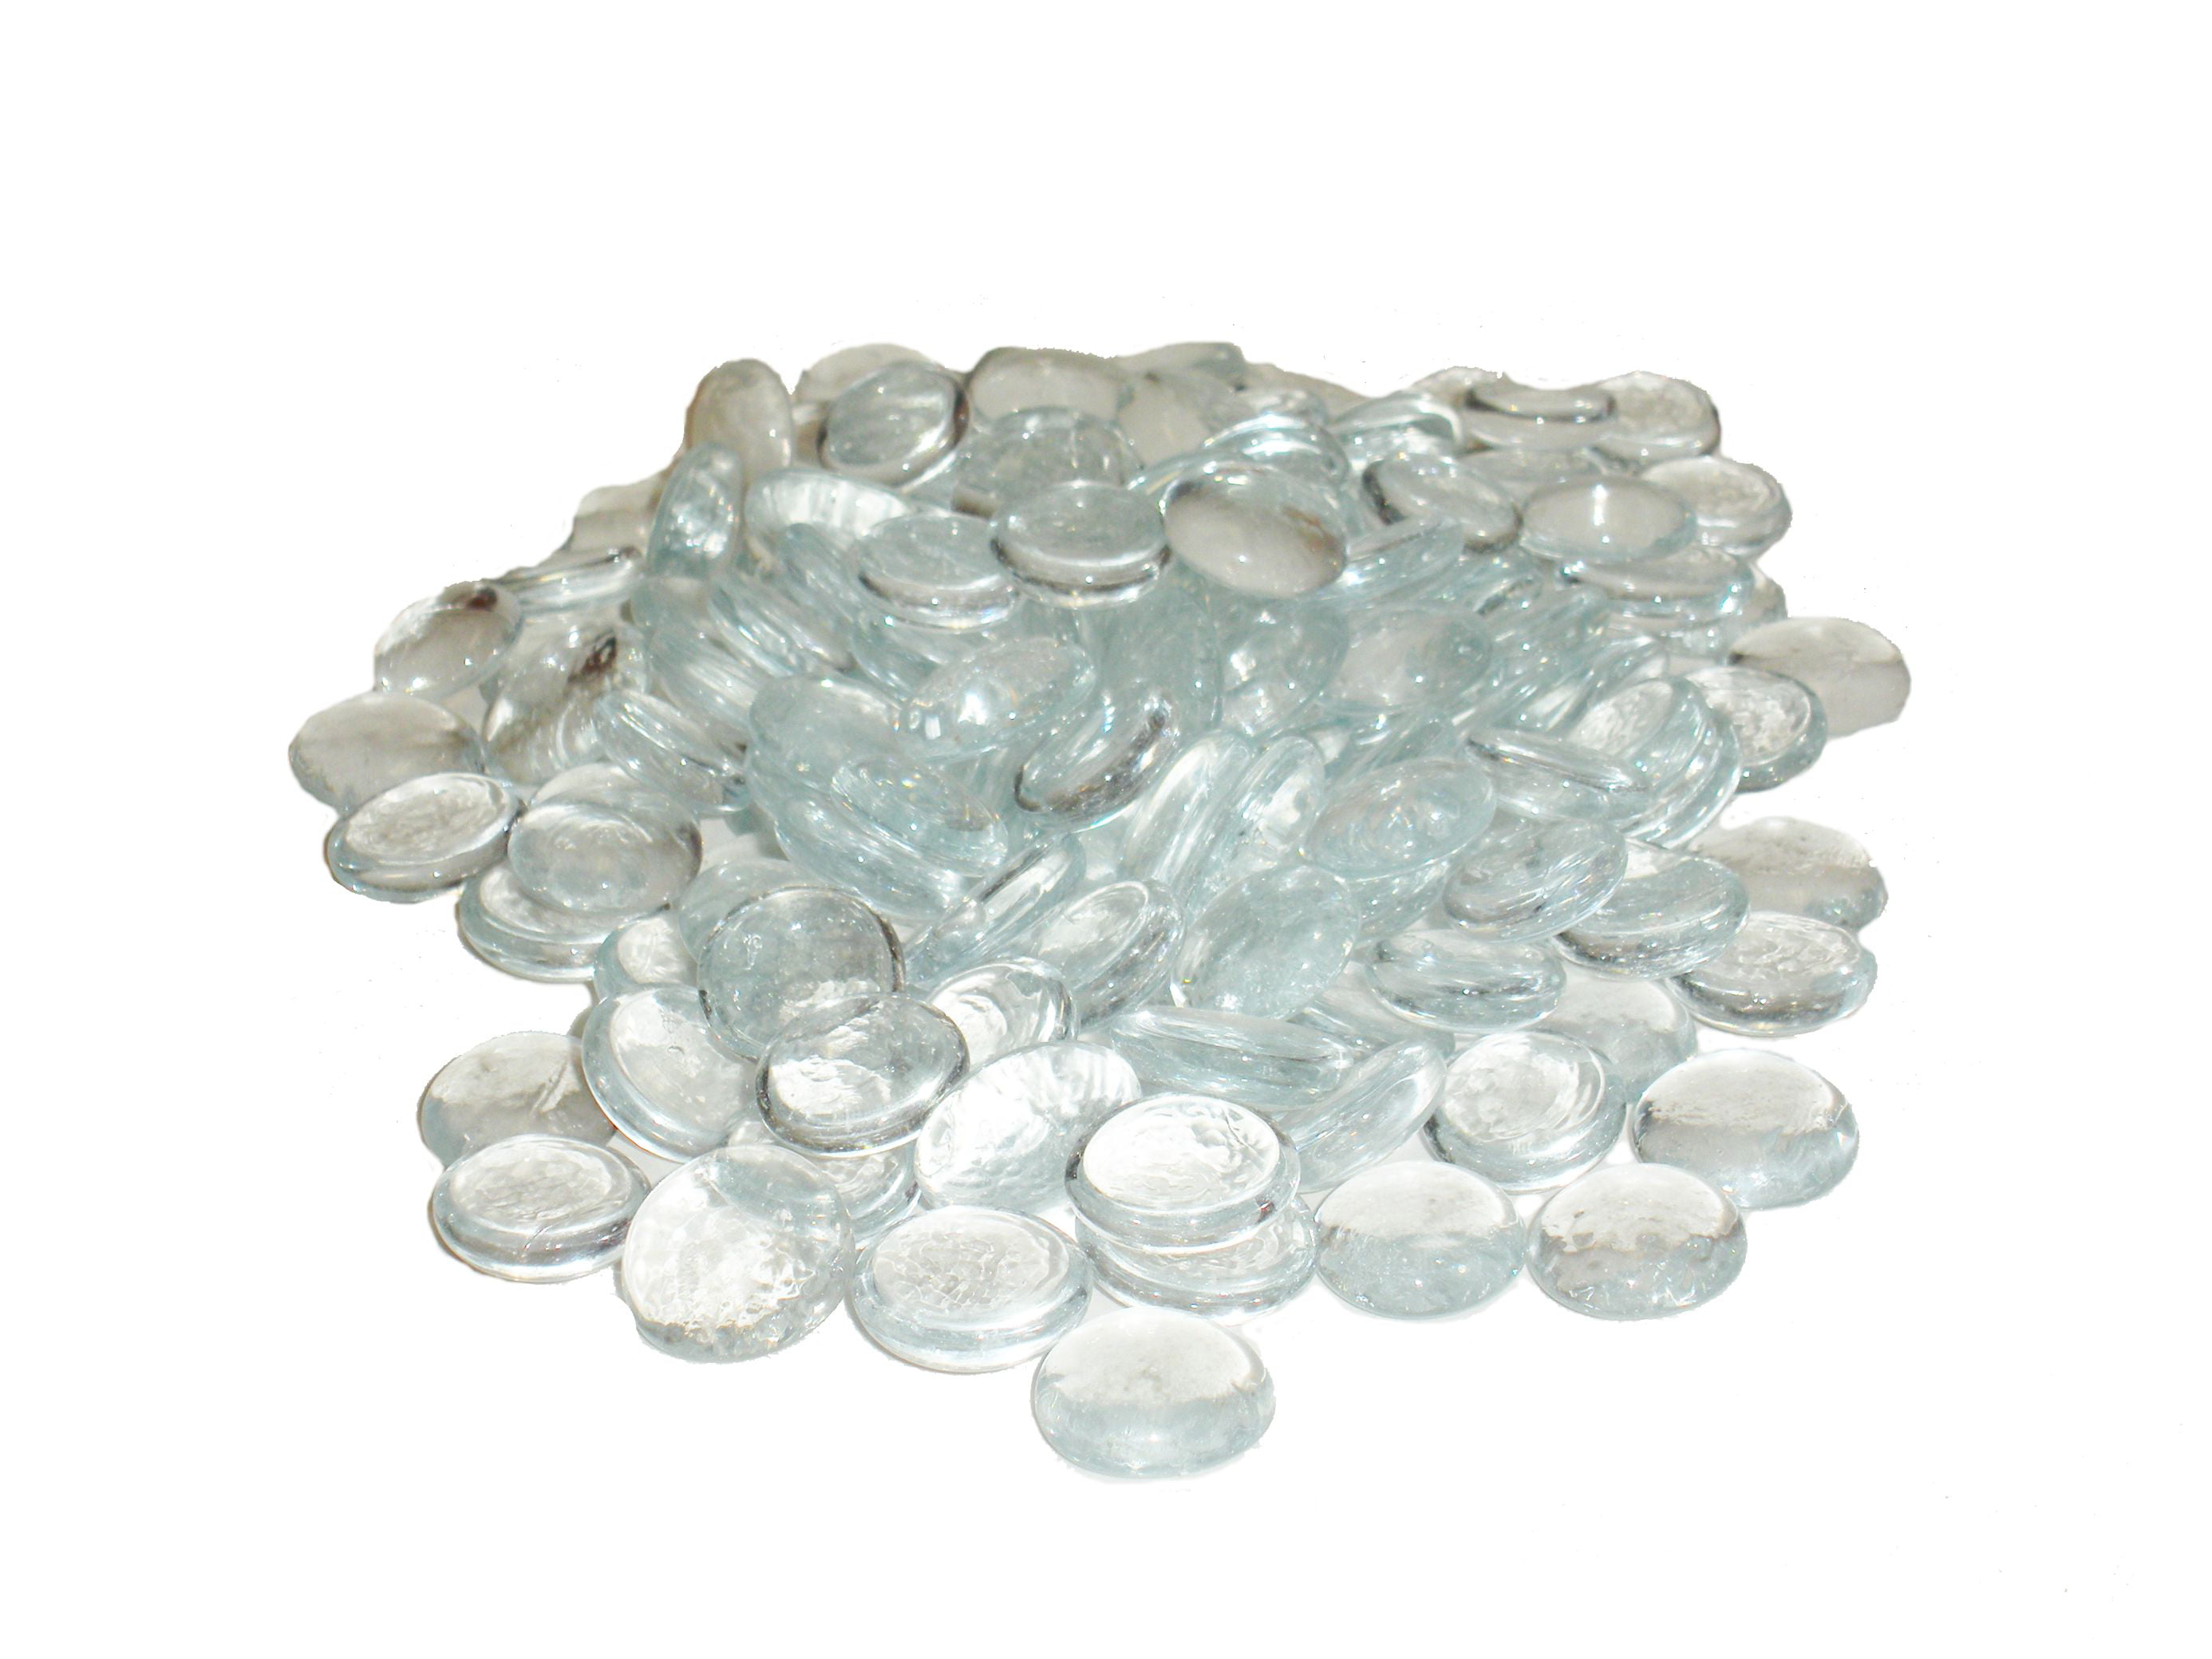 1000 Clear Glass Pebbles 12 lbs Flat Bottom Gem Stones Marbles Vase Fillers 